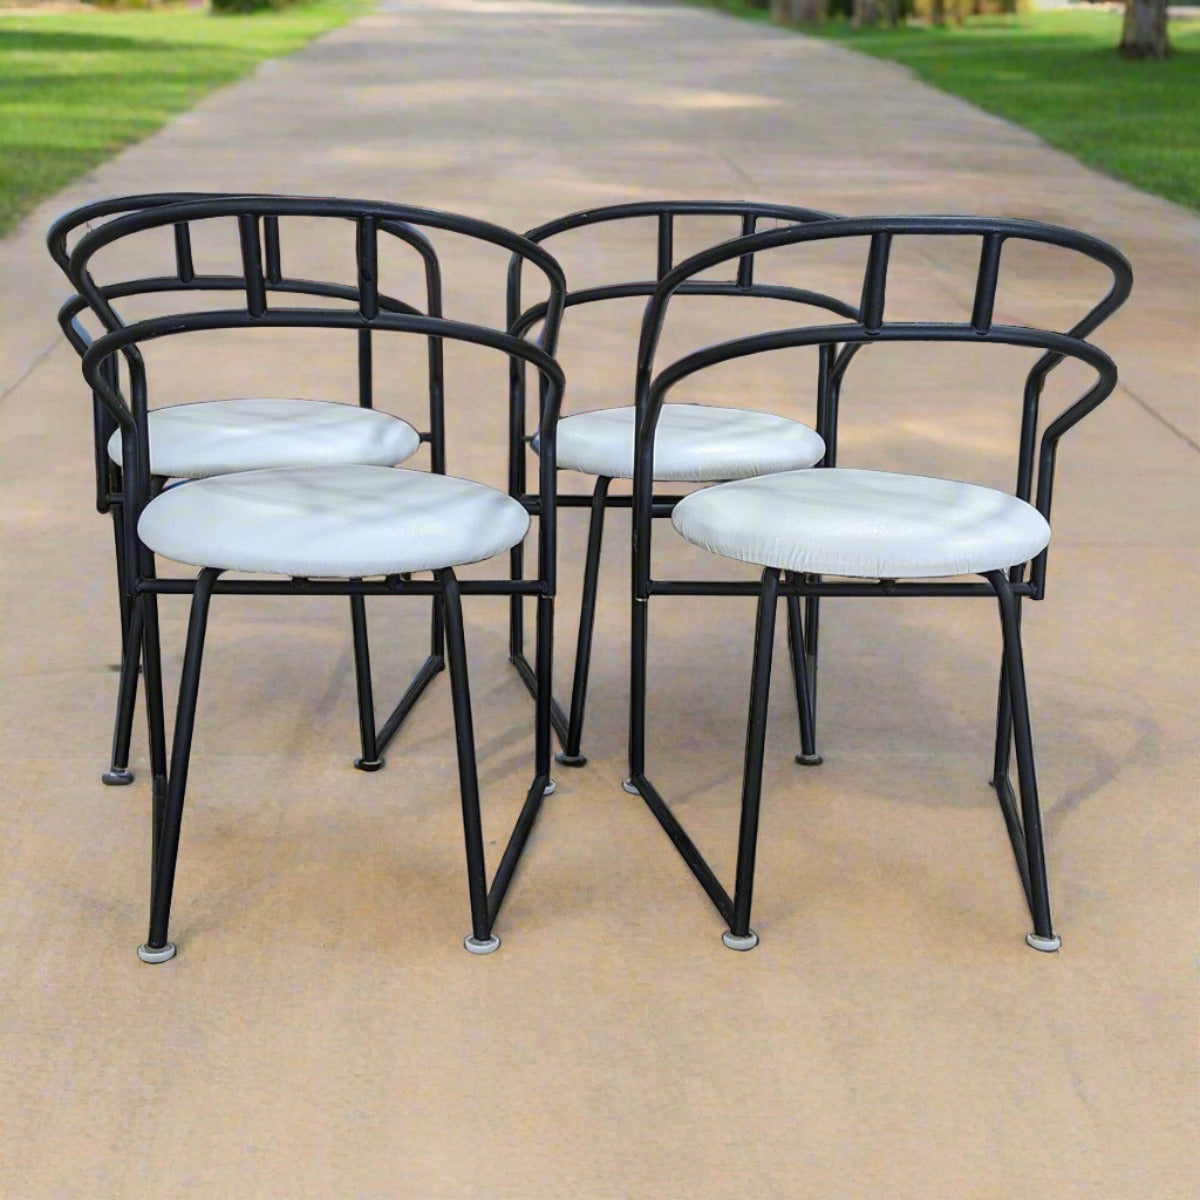 SET 4 Post Modern Black Metal Frame Dining Chairs by Cali-Style - Habitat Oakland ReStores